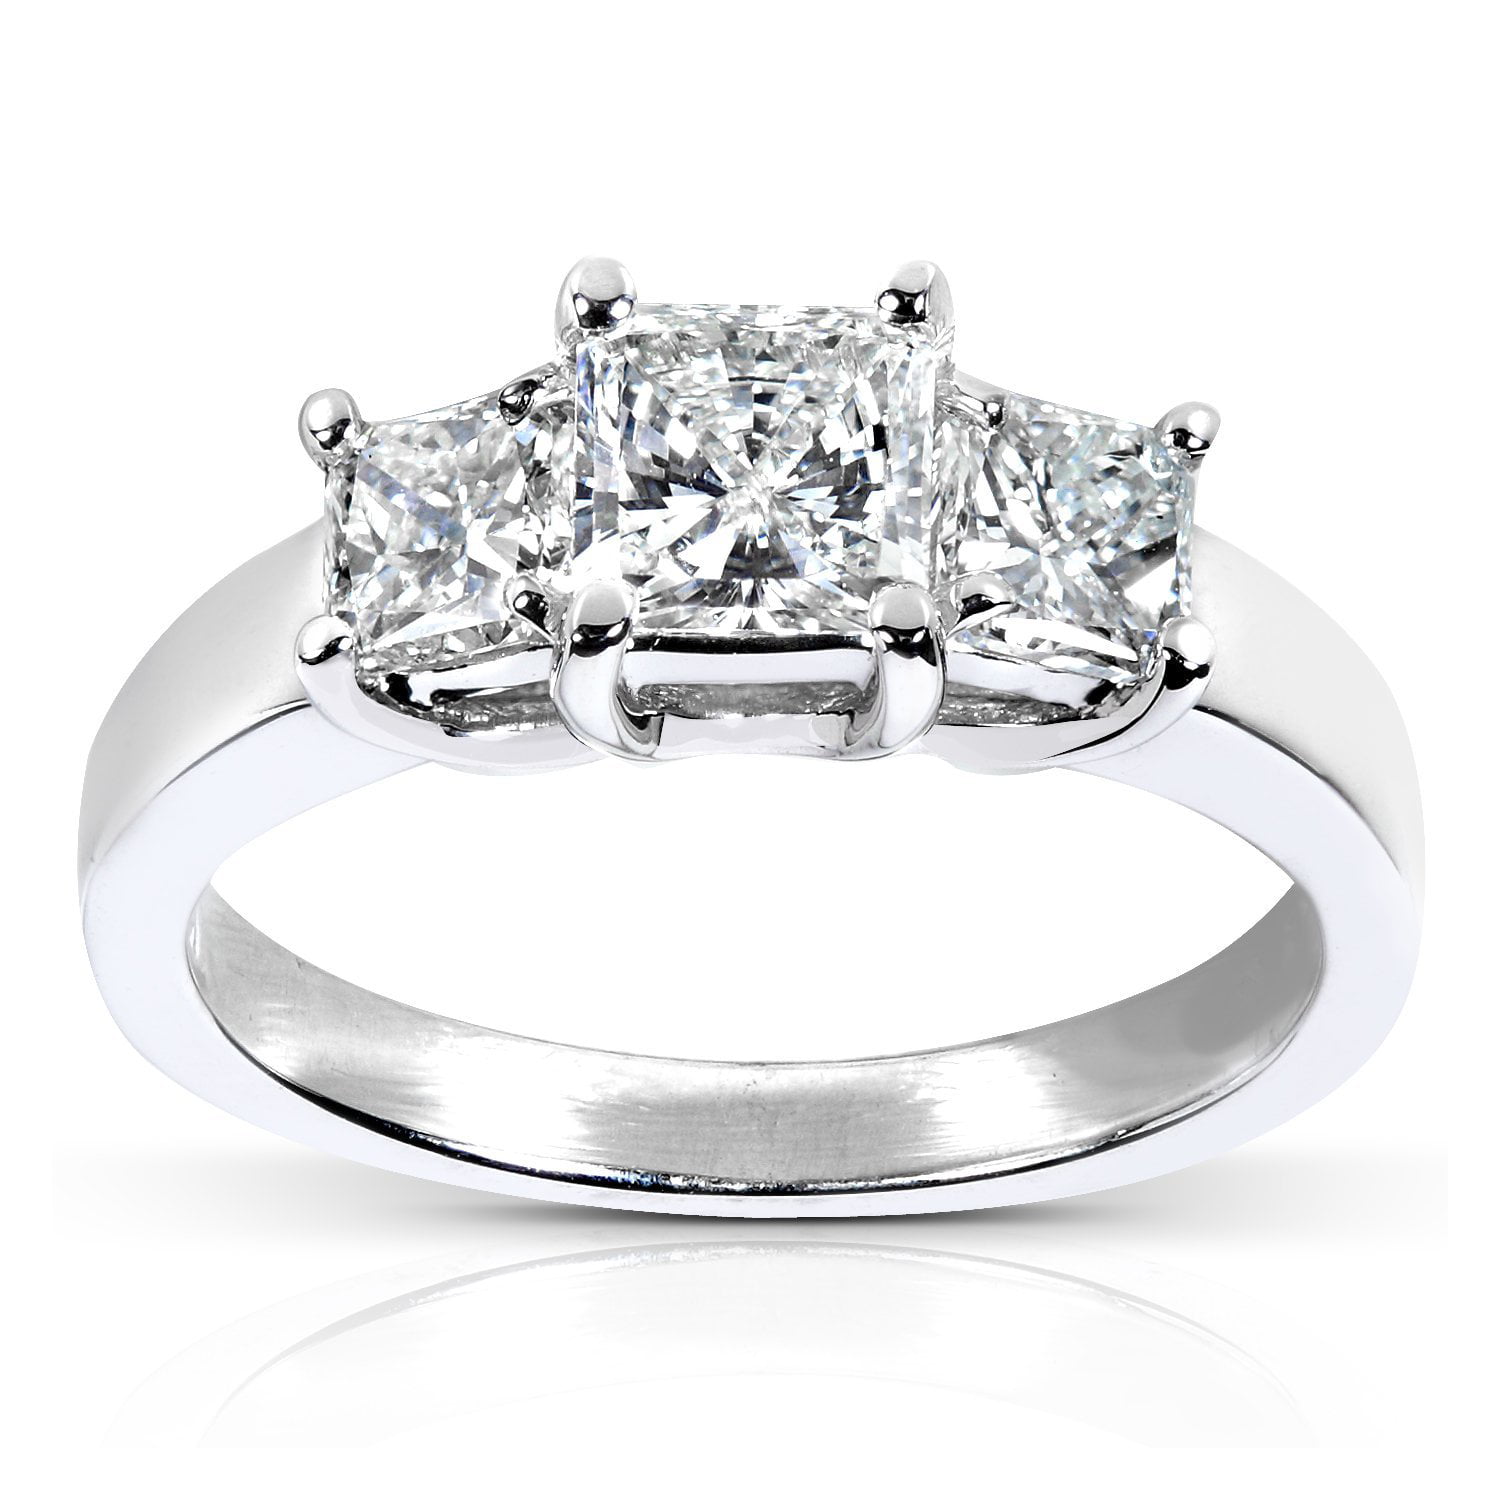 1.57CTW ROUND BRILLIANT STONE SOLITAIRE ENGAGEMENT BRIDAL RING size #5,6,8,9 